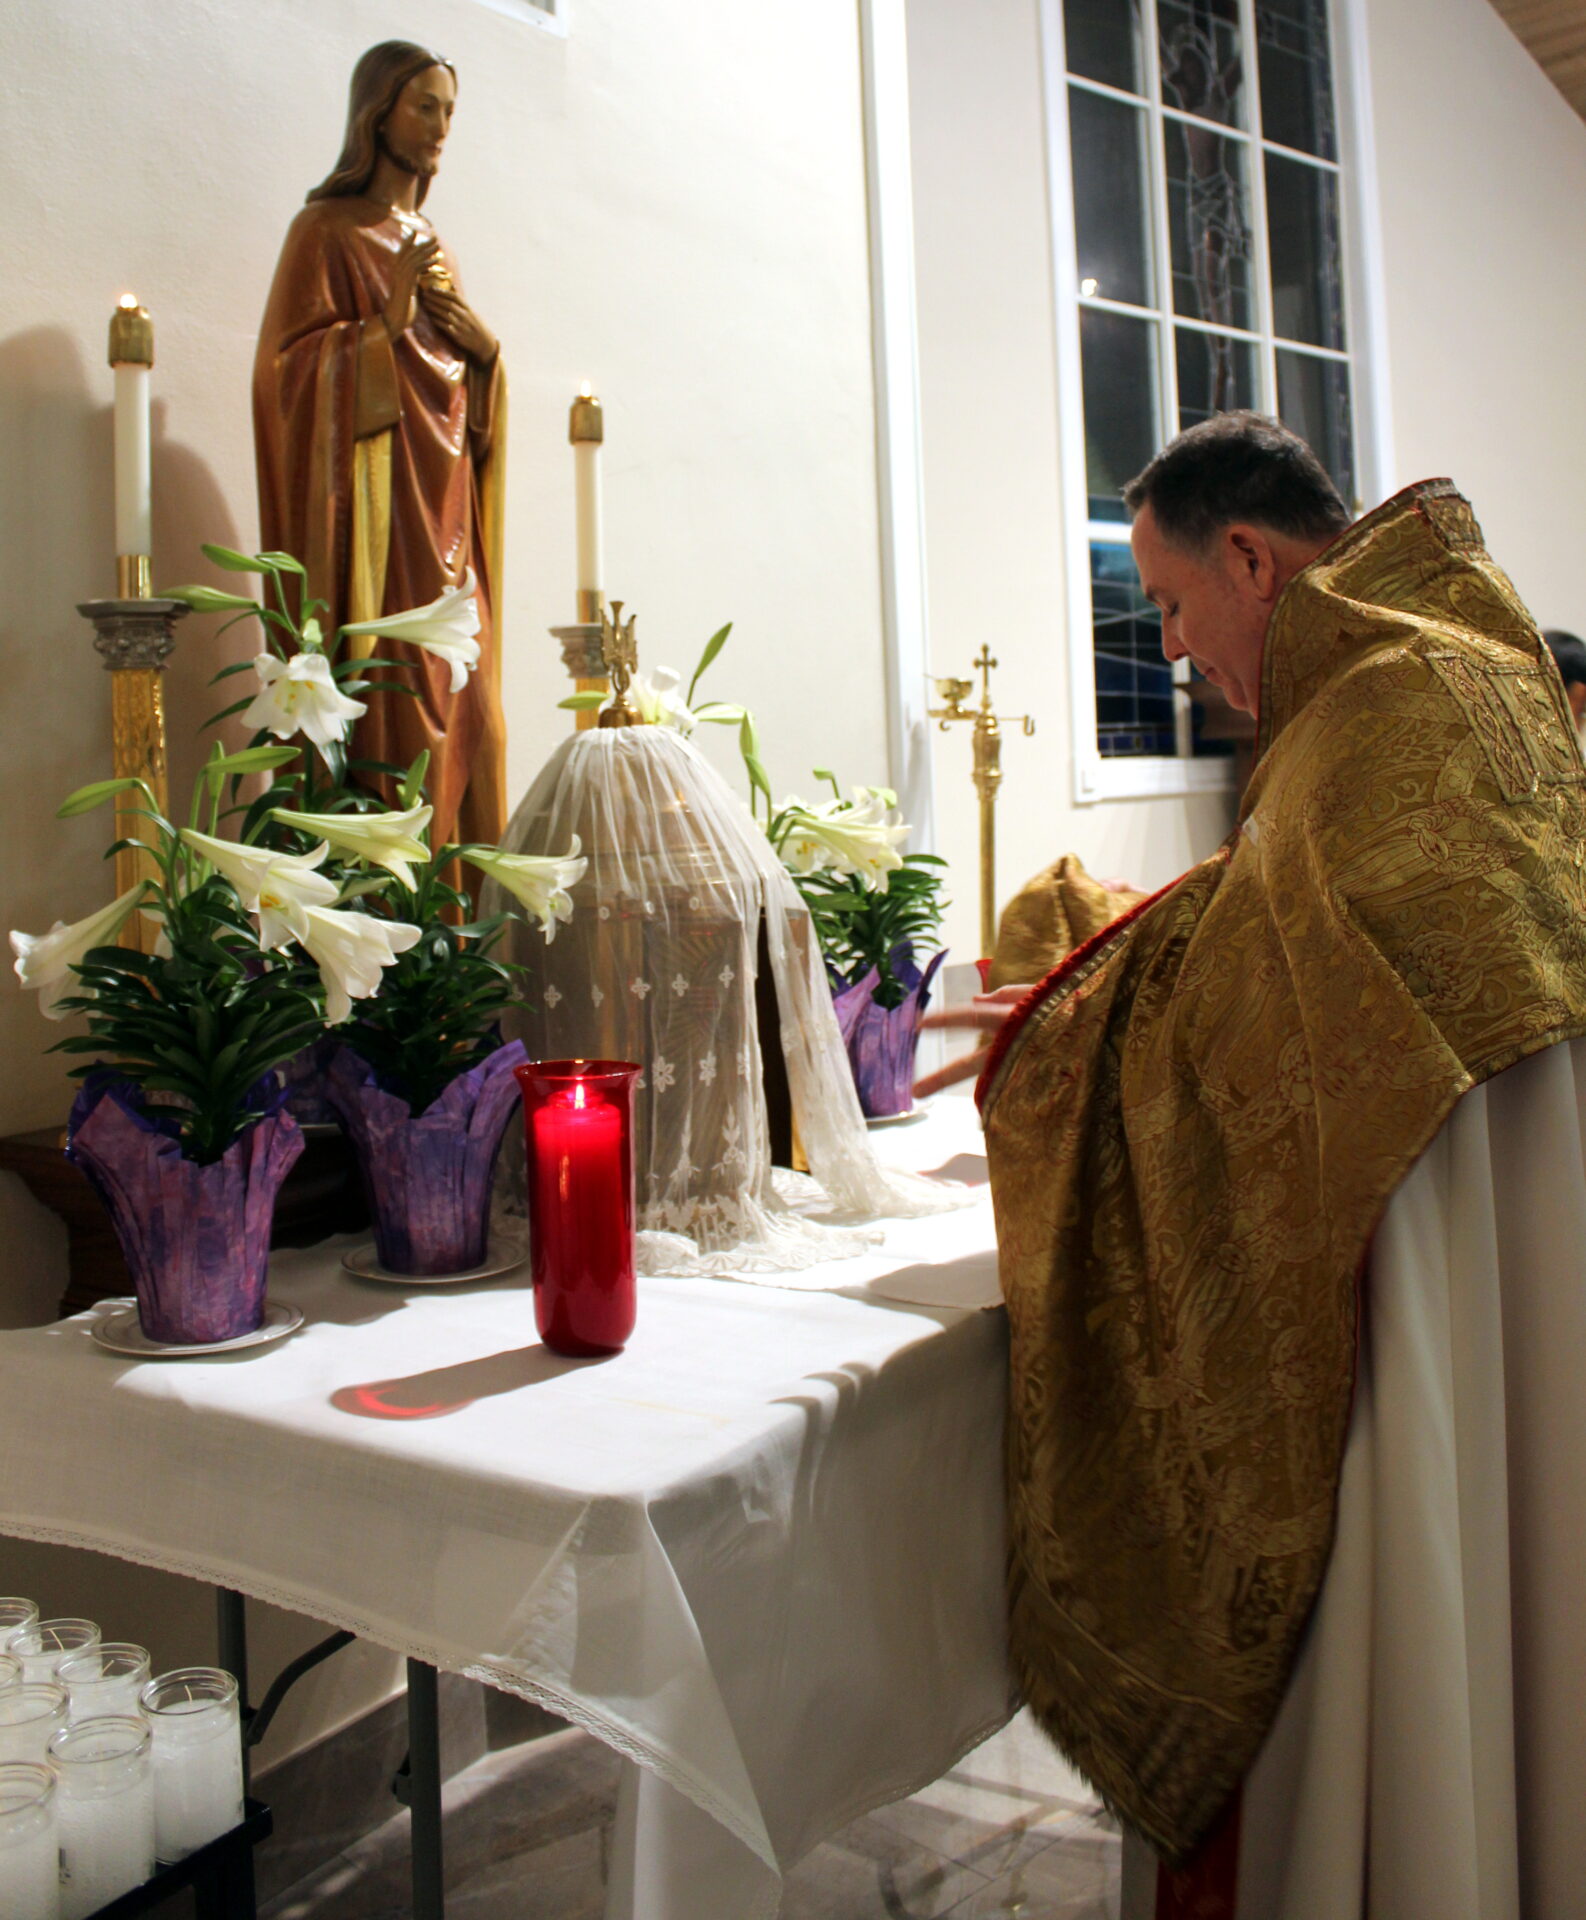 The priest praying at the altar